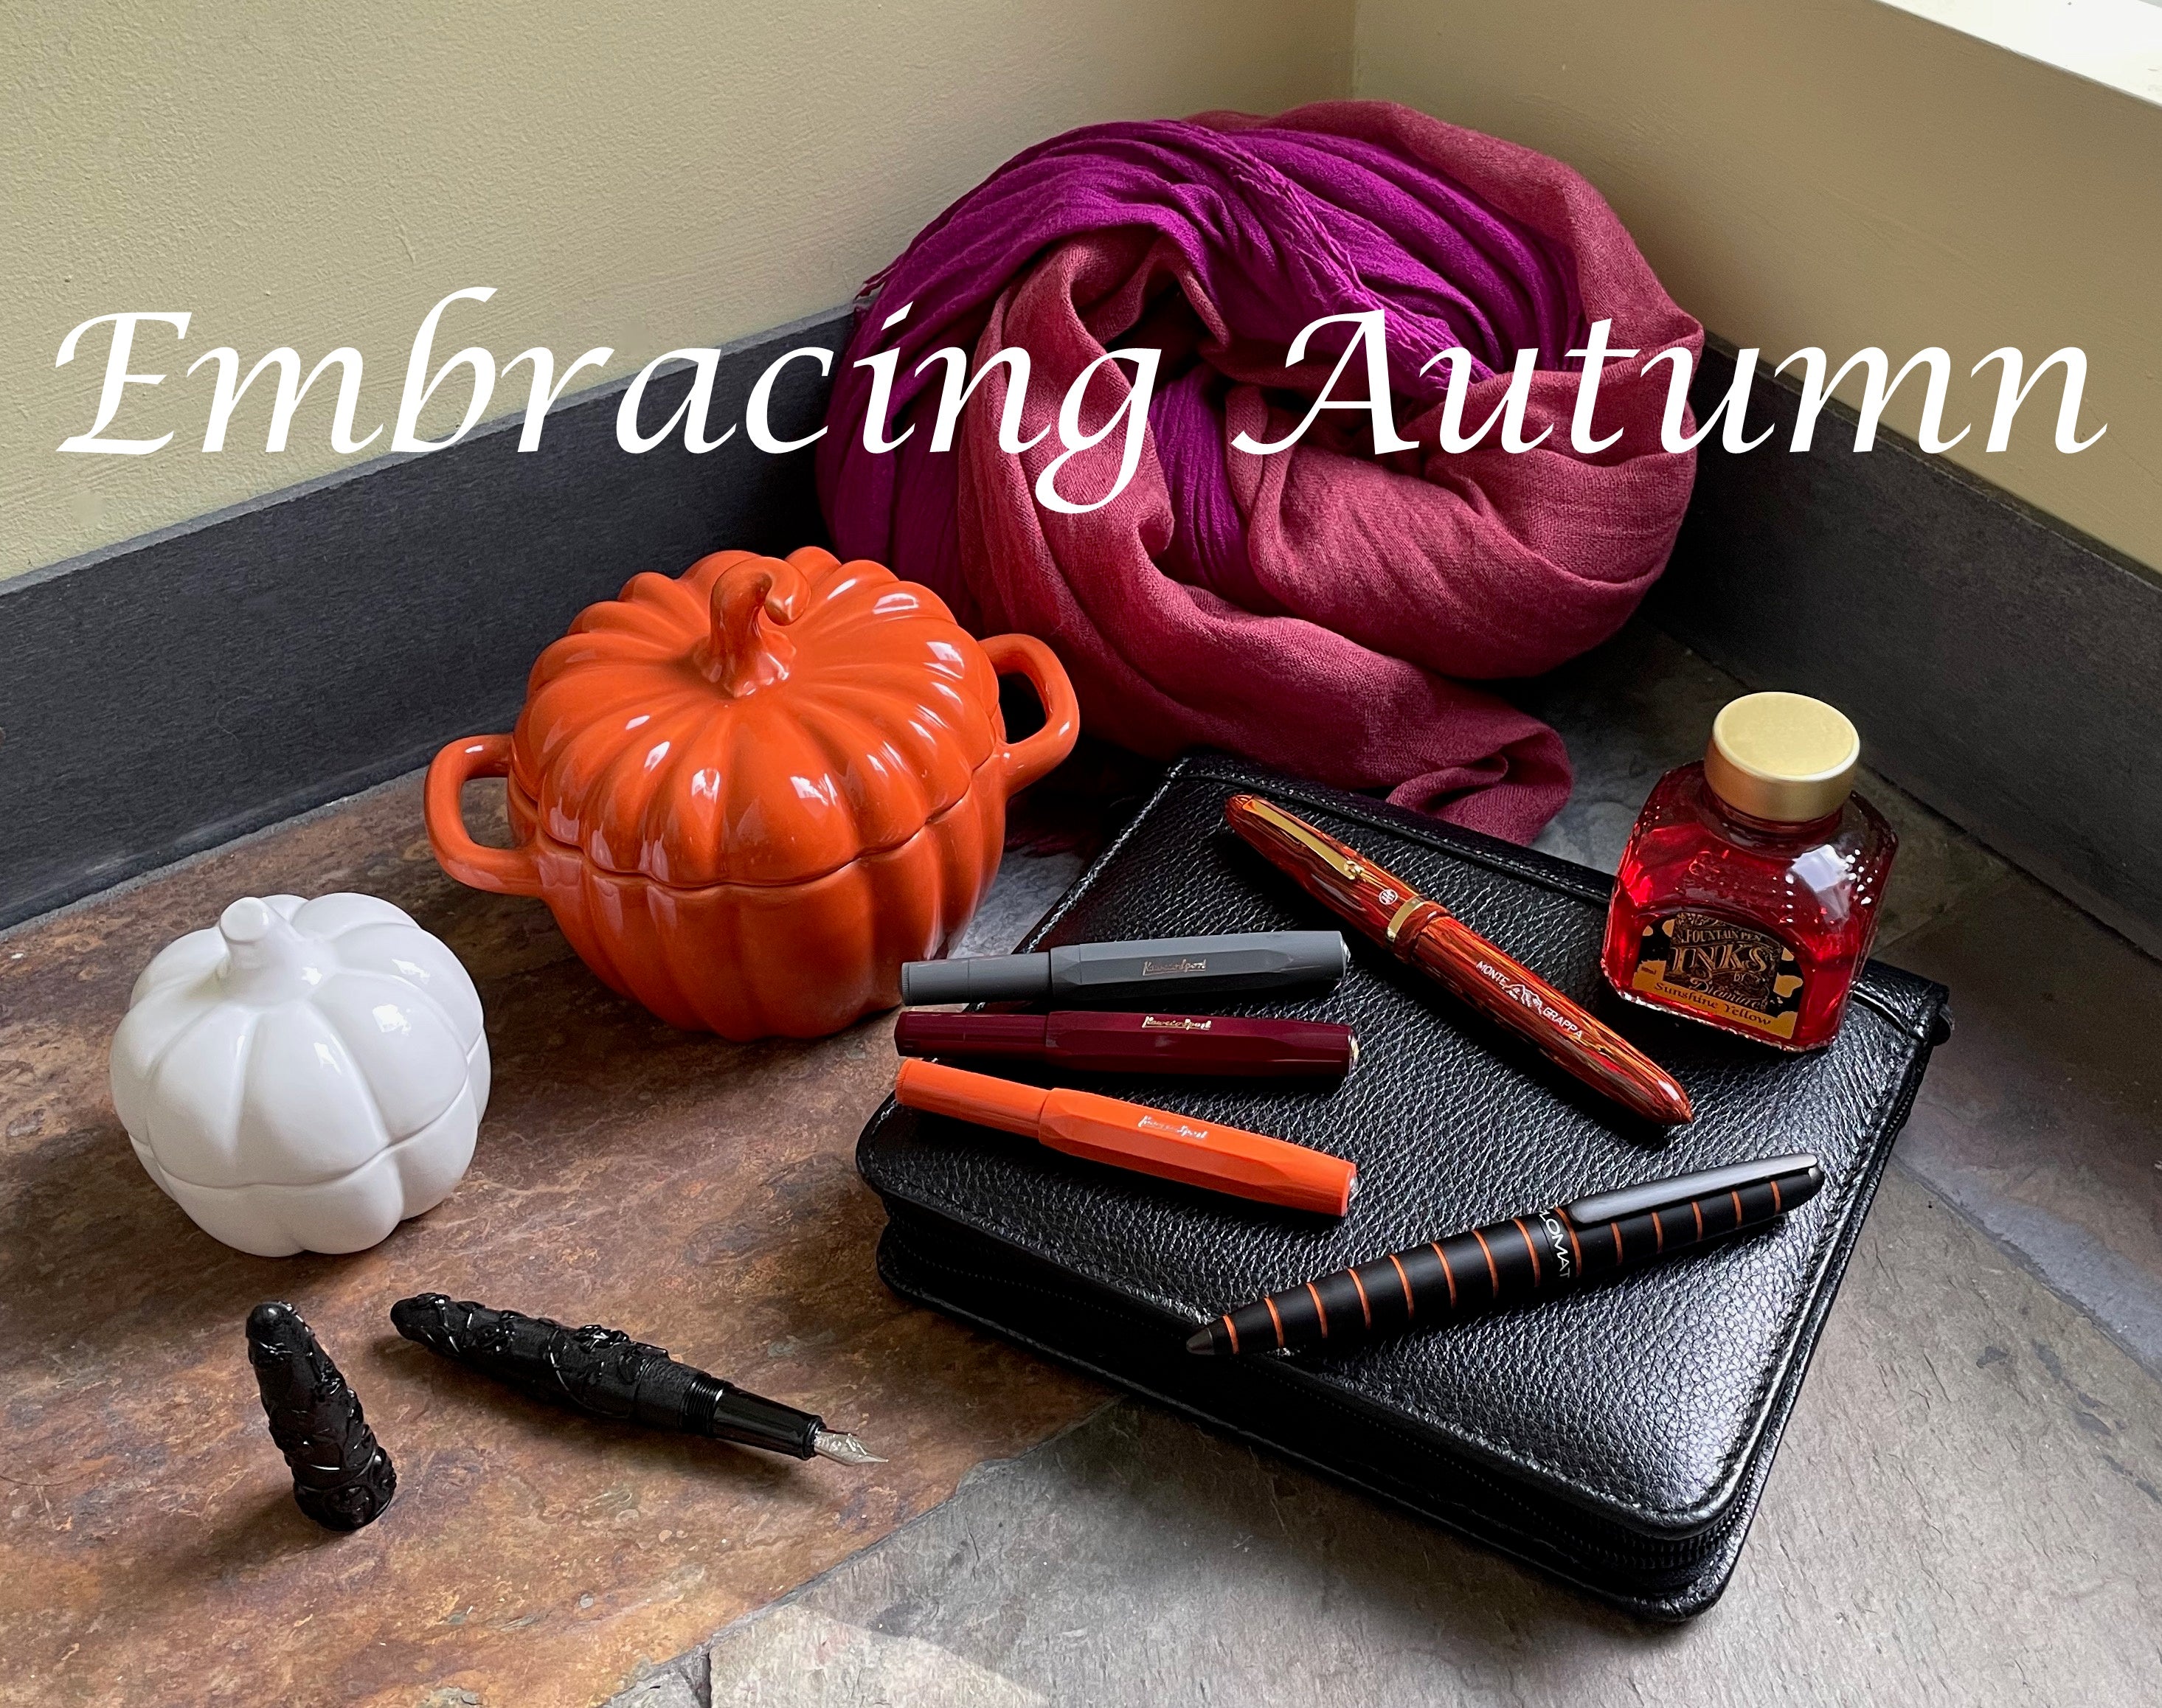 Embracing Autumn -- Pens, Inks, and Stationery to Inspire You this Fall!